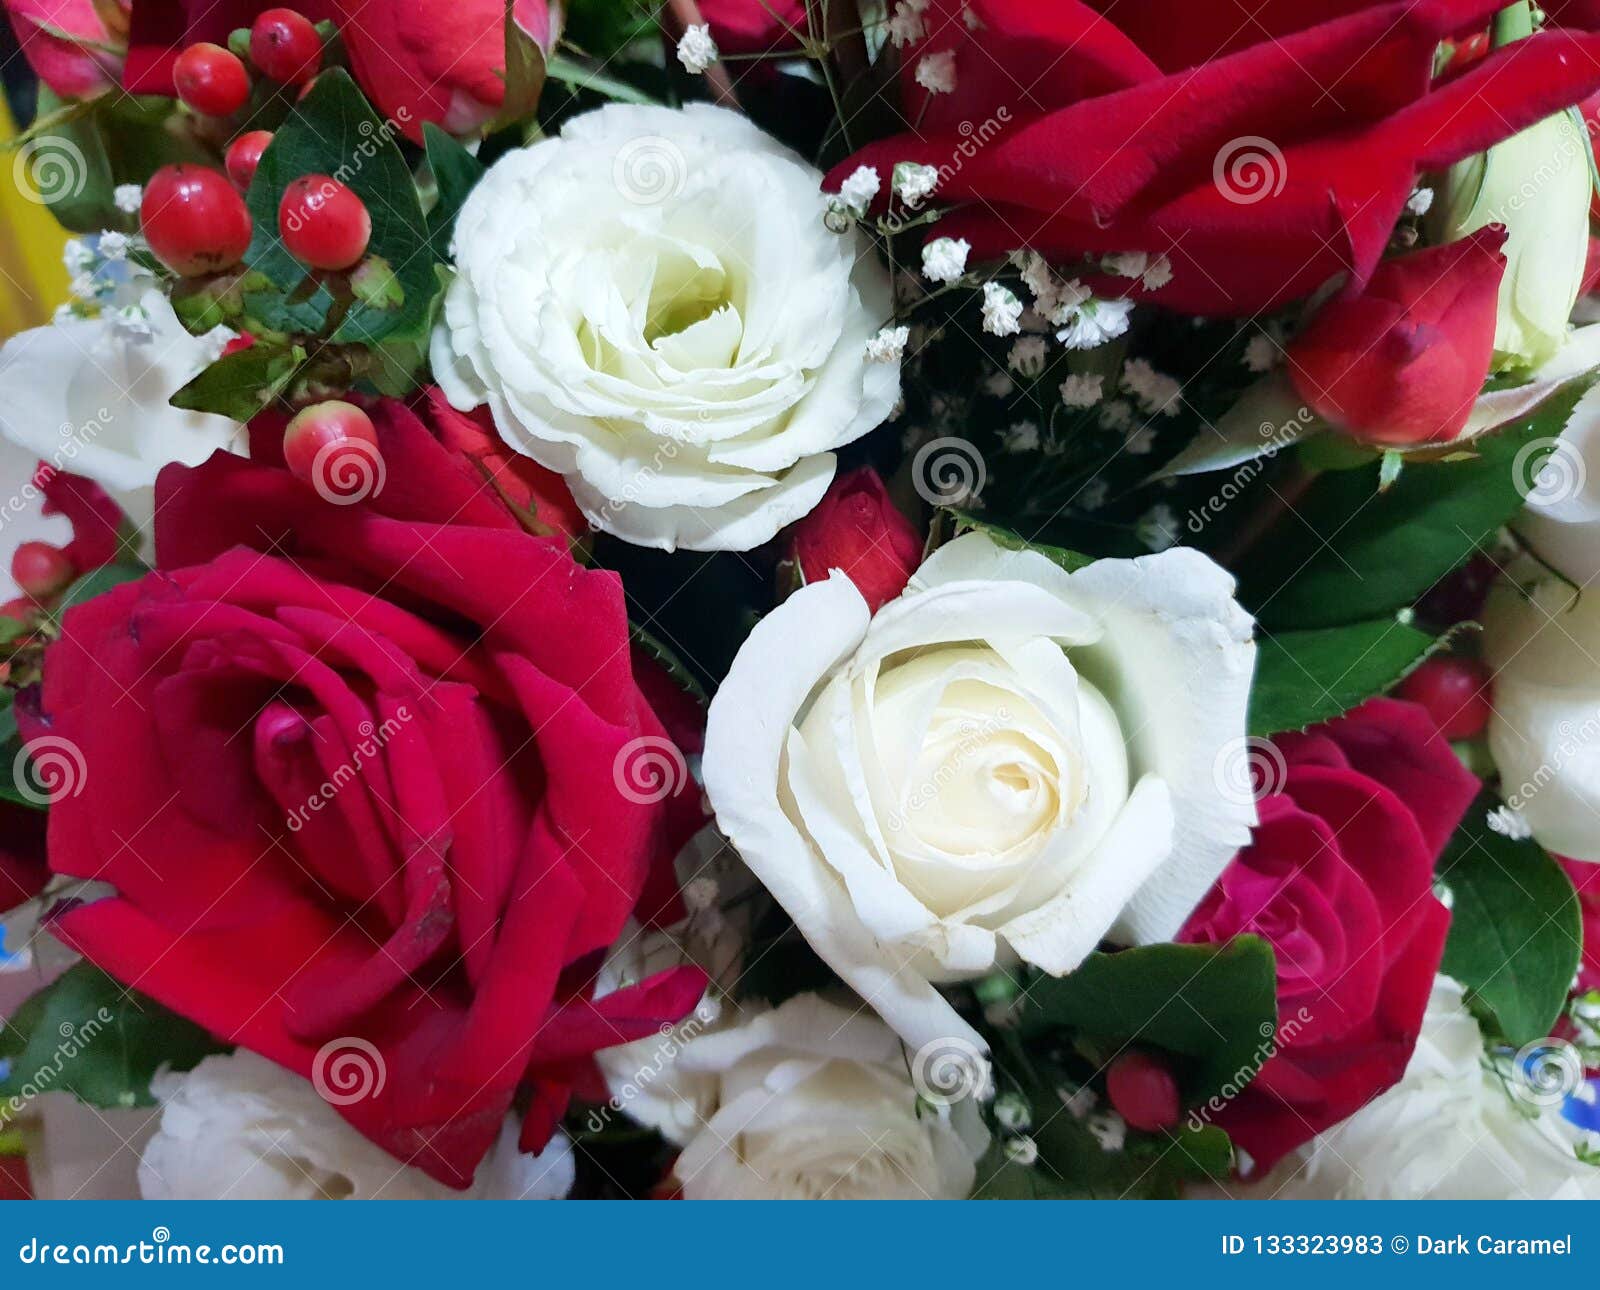 Beautiful Big Roses Flower Valentine Day Love Concept Top View Stock Image Image Of Natural Element 133323983,What Is The Best Color For Dark Brown Hair